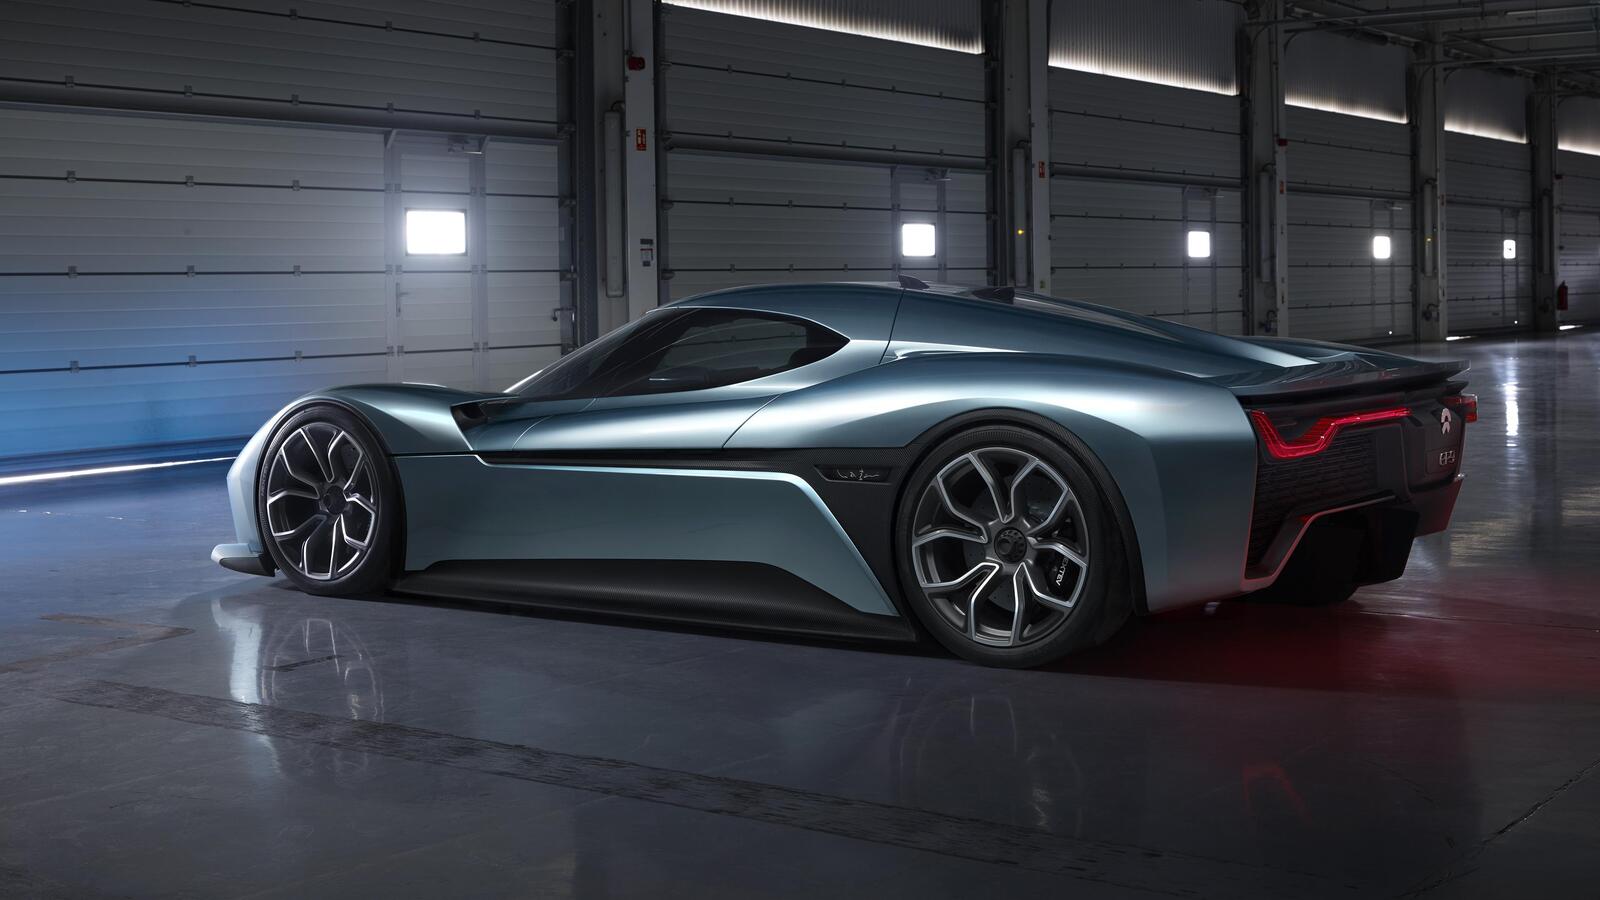 Wallpapers Nio Ep9 Electric Cars Cars on the desktop